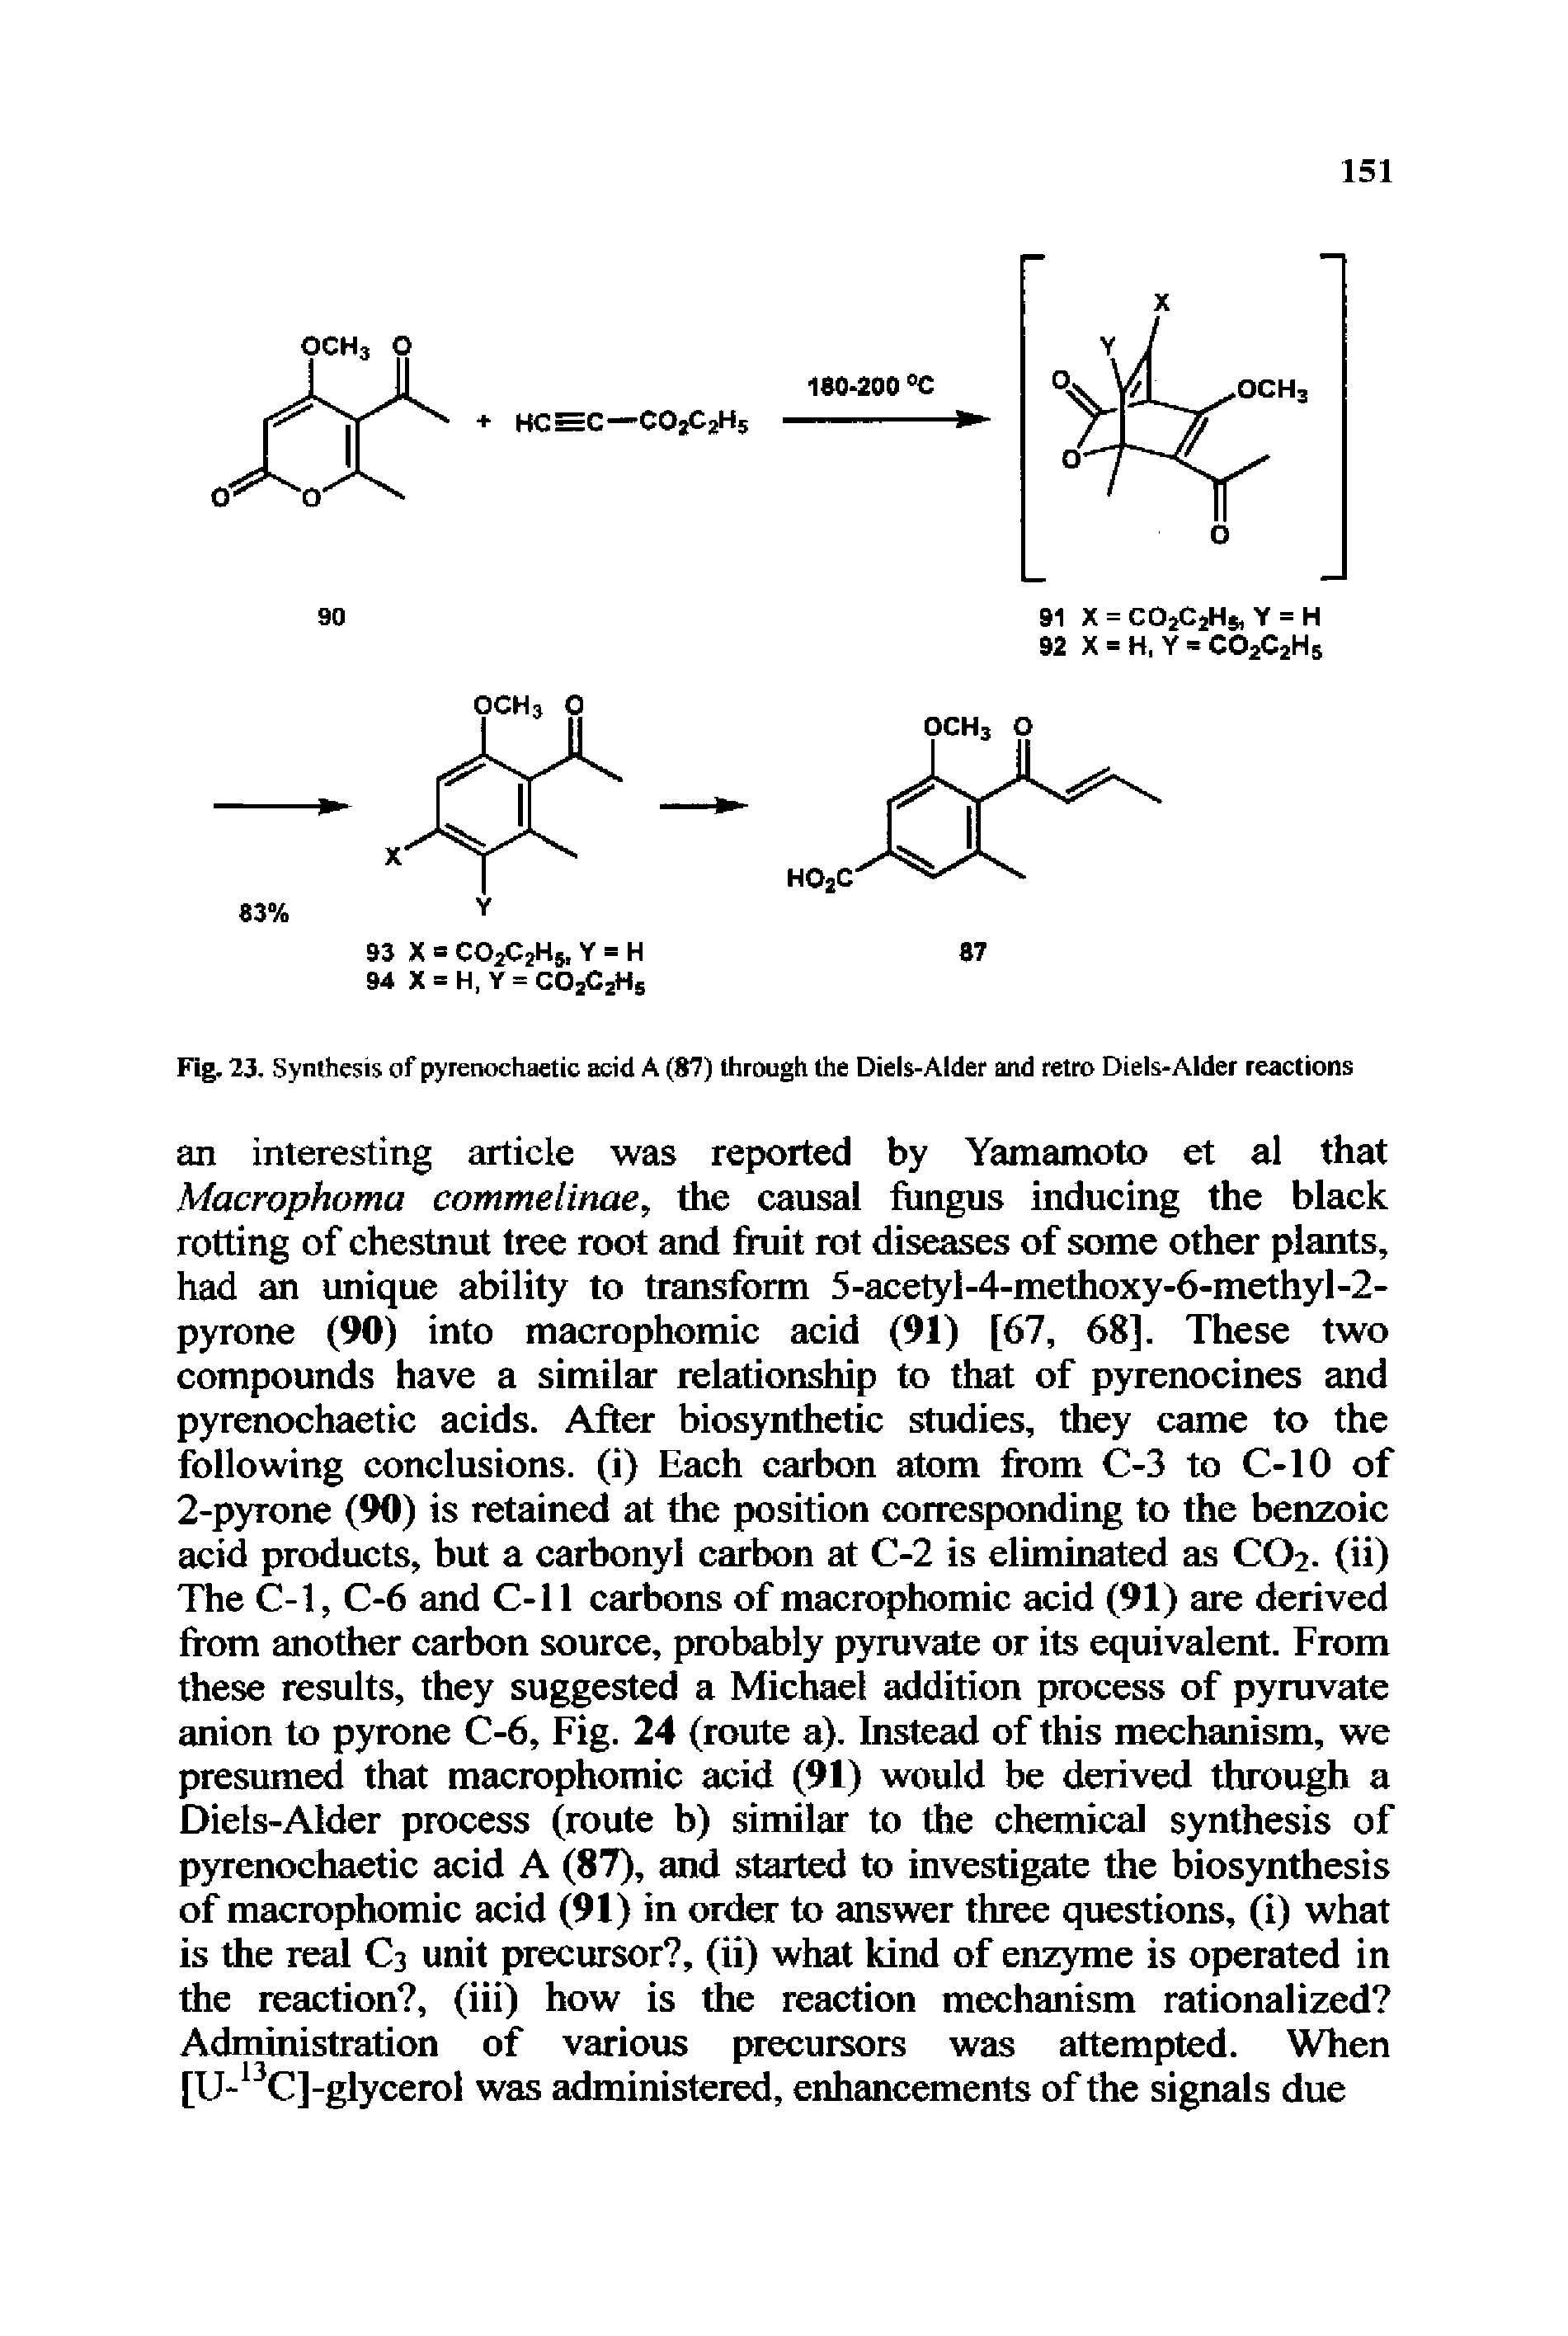 Fig. 23. Synthesis of pyrenochaetic acid A (87) through the Diels-Alder and retro Diels-Alder reactions...